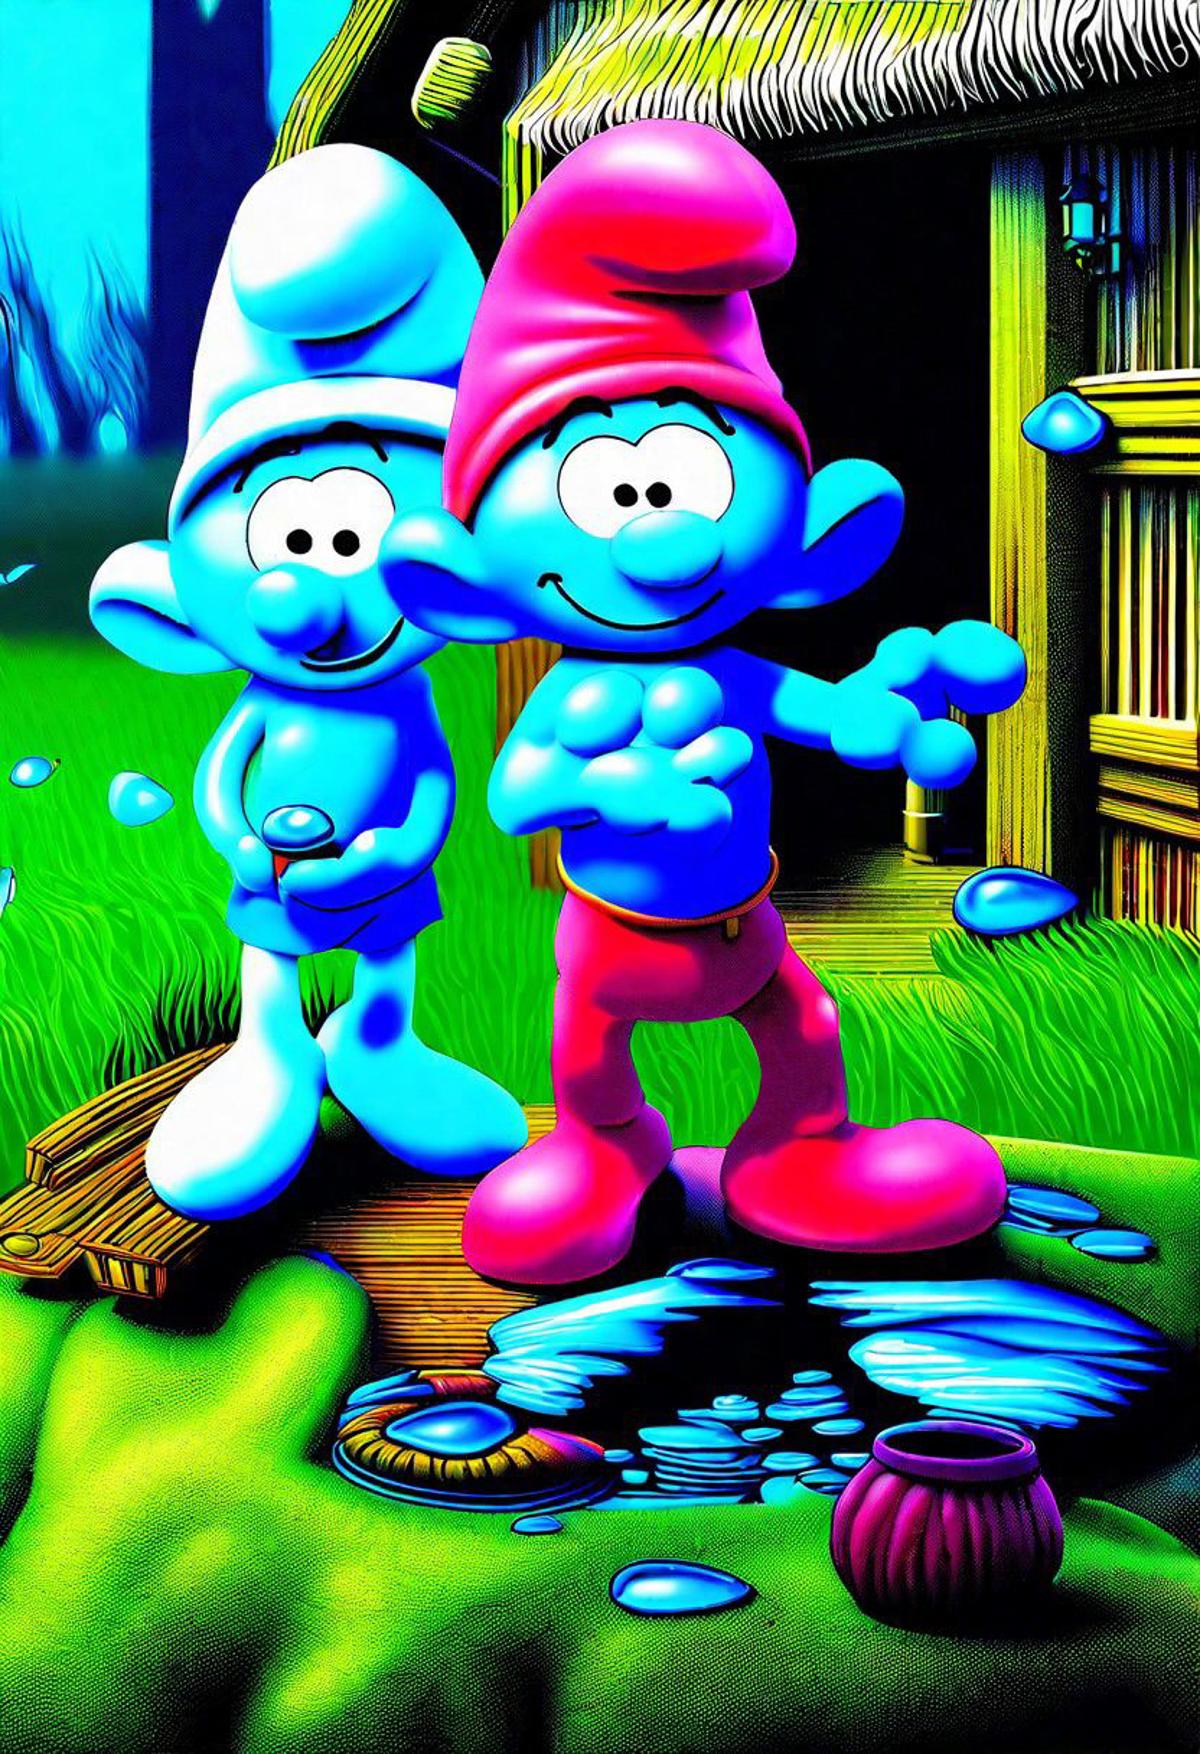 The Smurfs - SDXL image by Pops_T_800_Cyborg